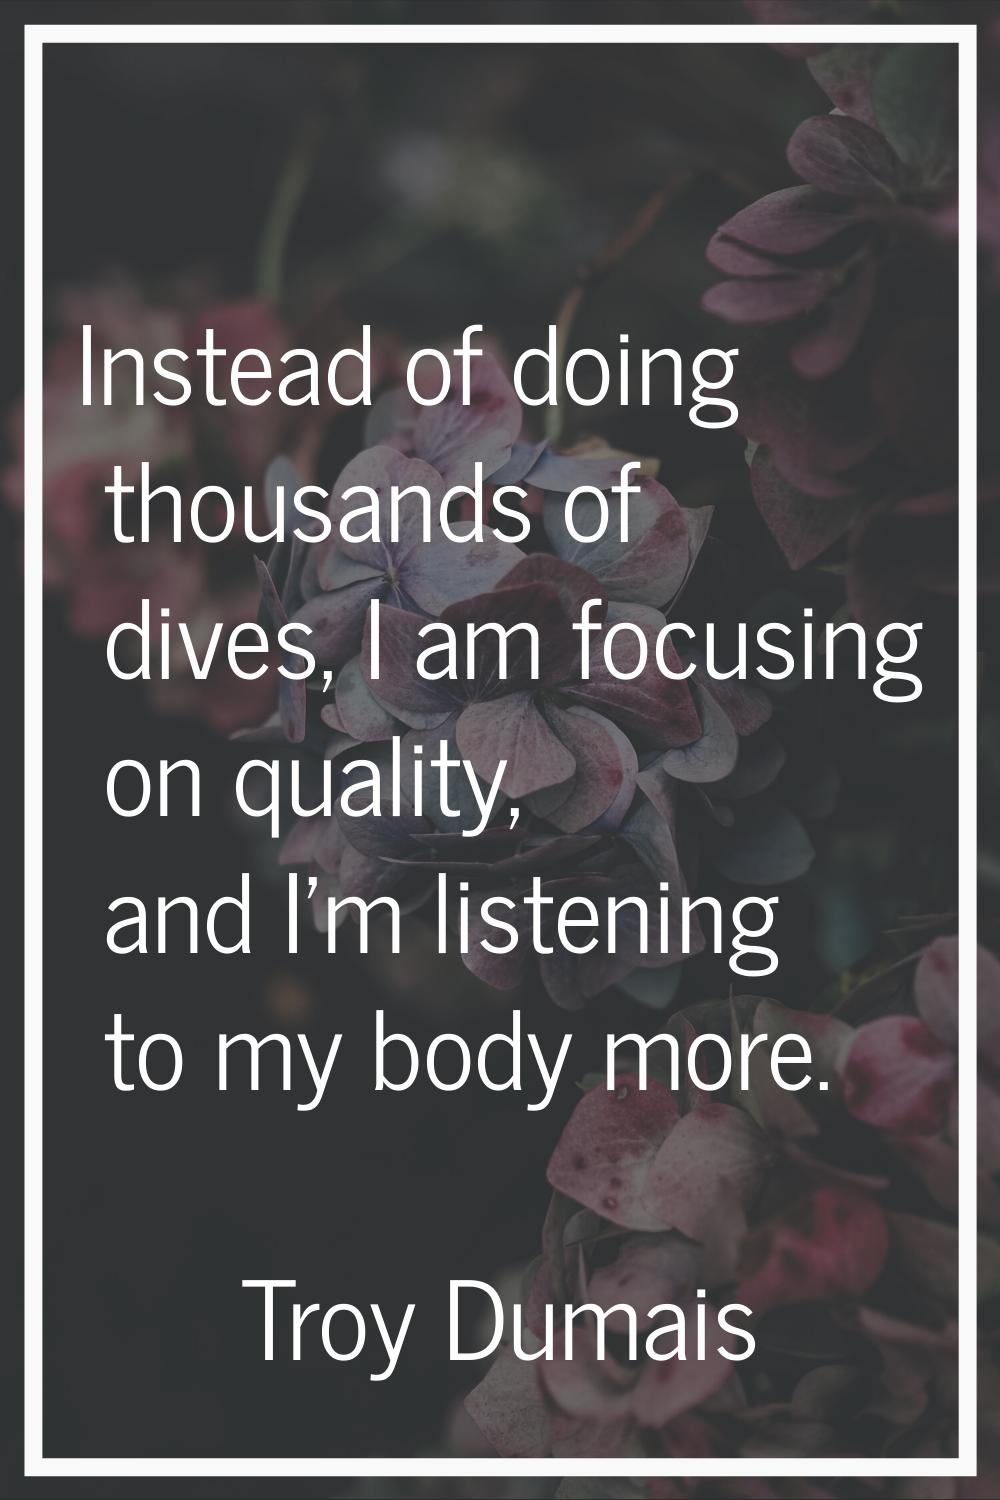 Instead of doing thousands of dives, I am focusing on quality, and I'm listening to my body more.